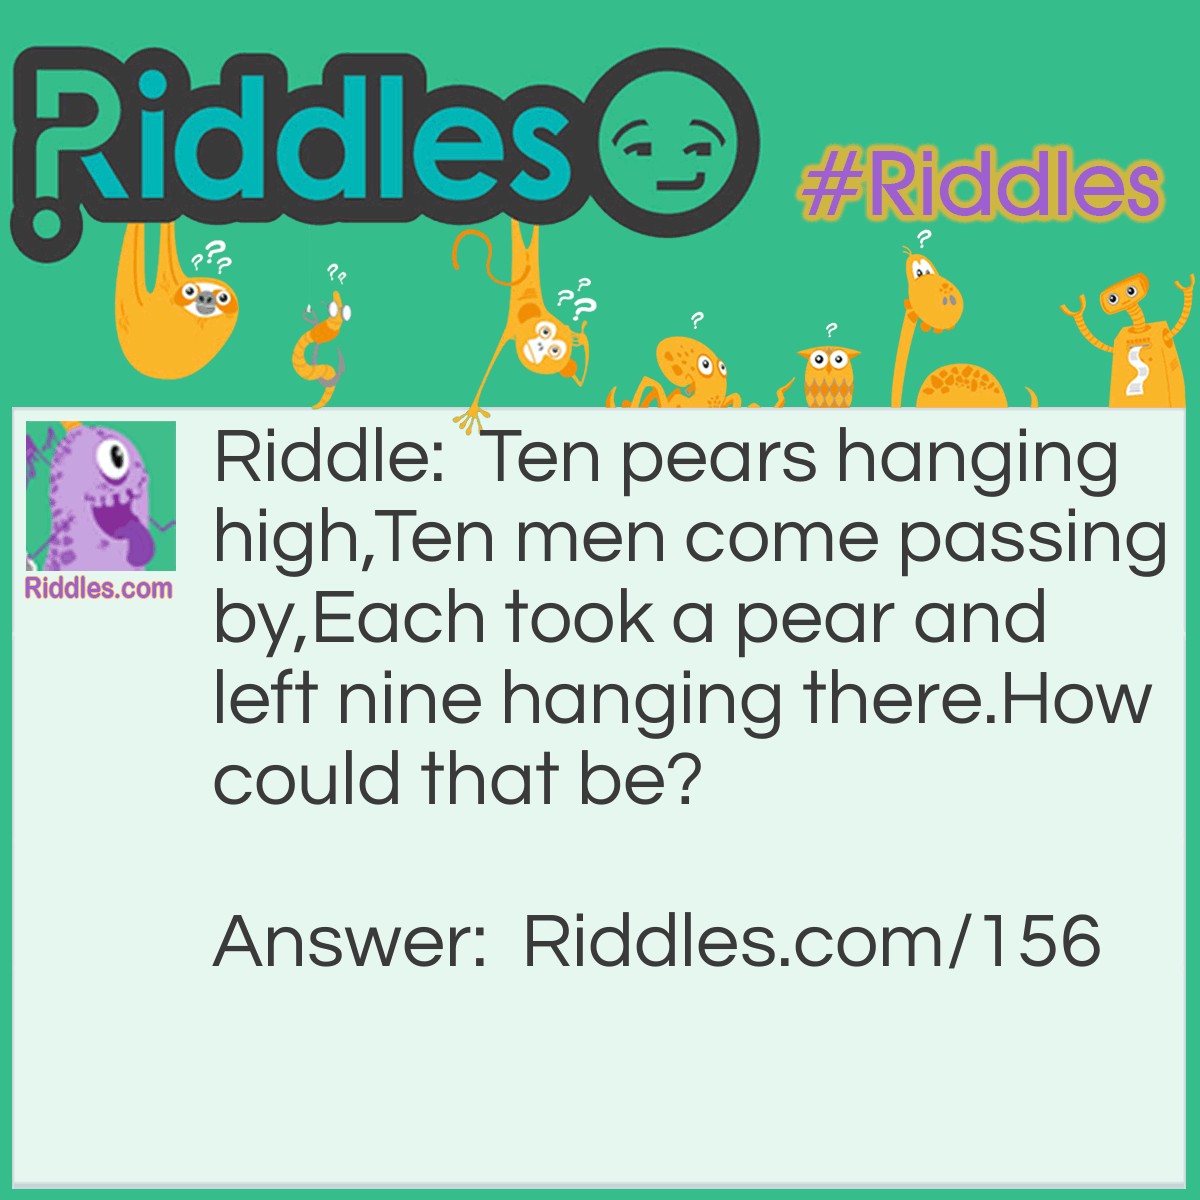 Riddle: Ten pears hanging high, Ten men come passing by, Each took a pear and left nine hanging there. How could that be? Answer: EACH is the name of one of the men, and he's the only one that took a pear.